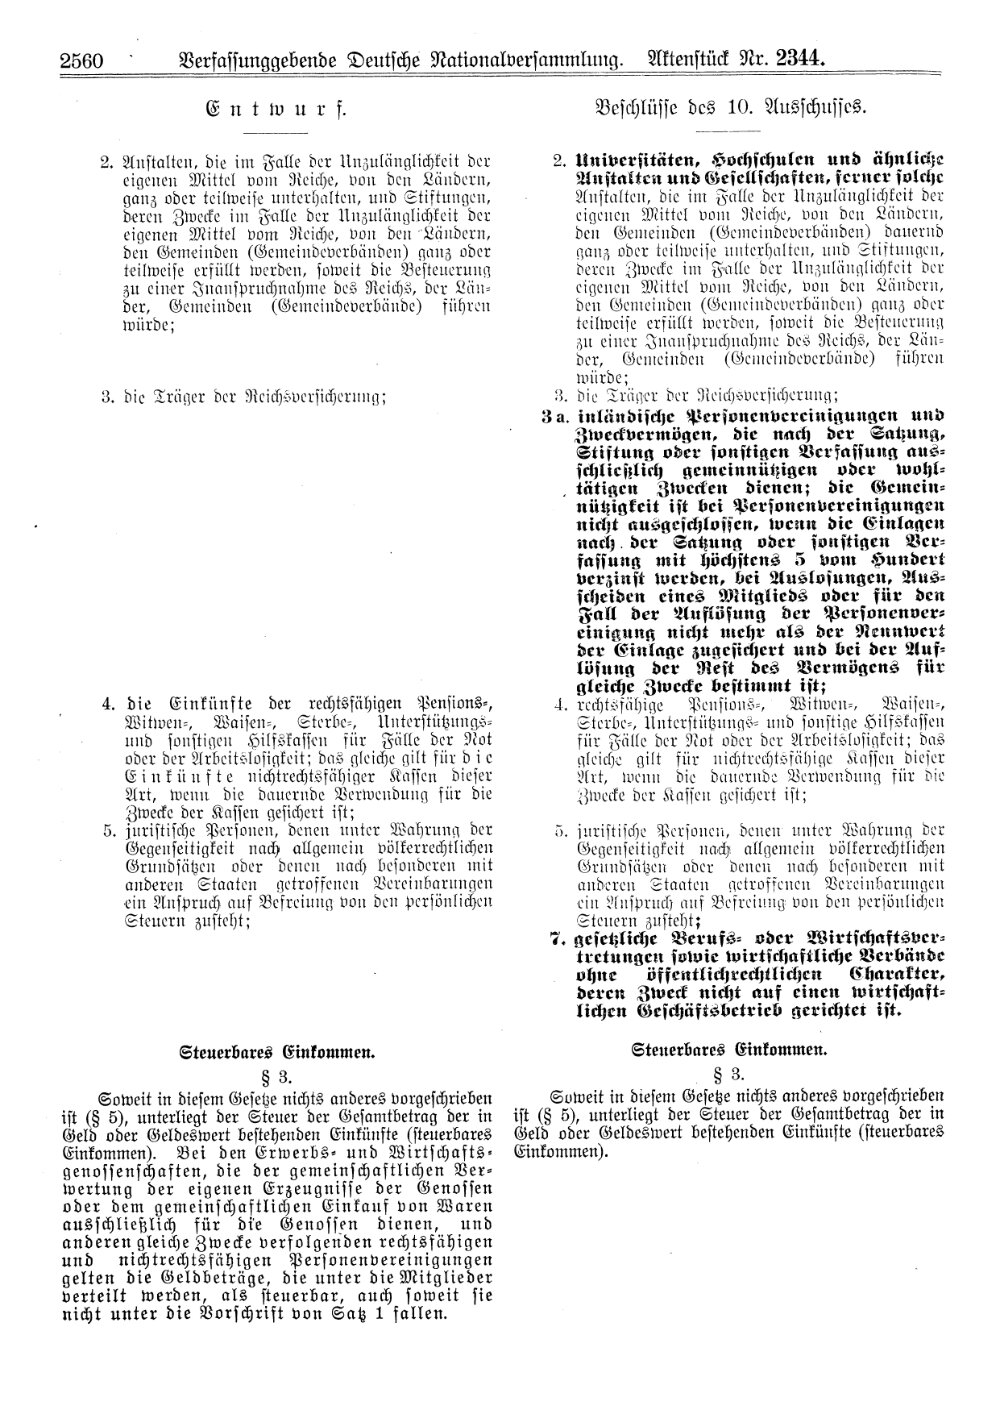 Scan of page 2560